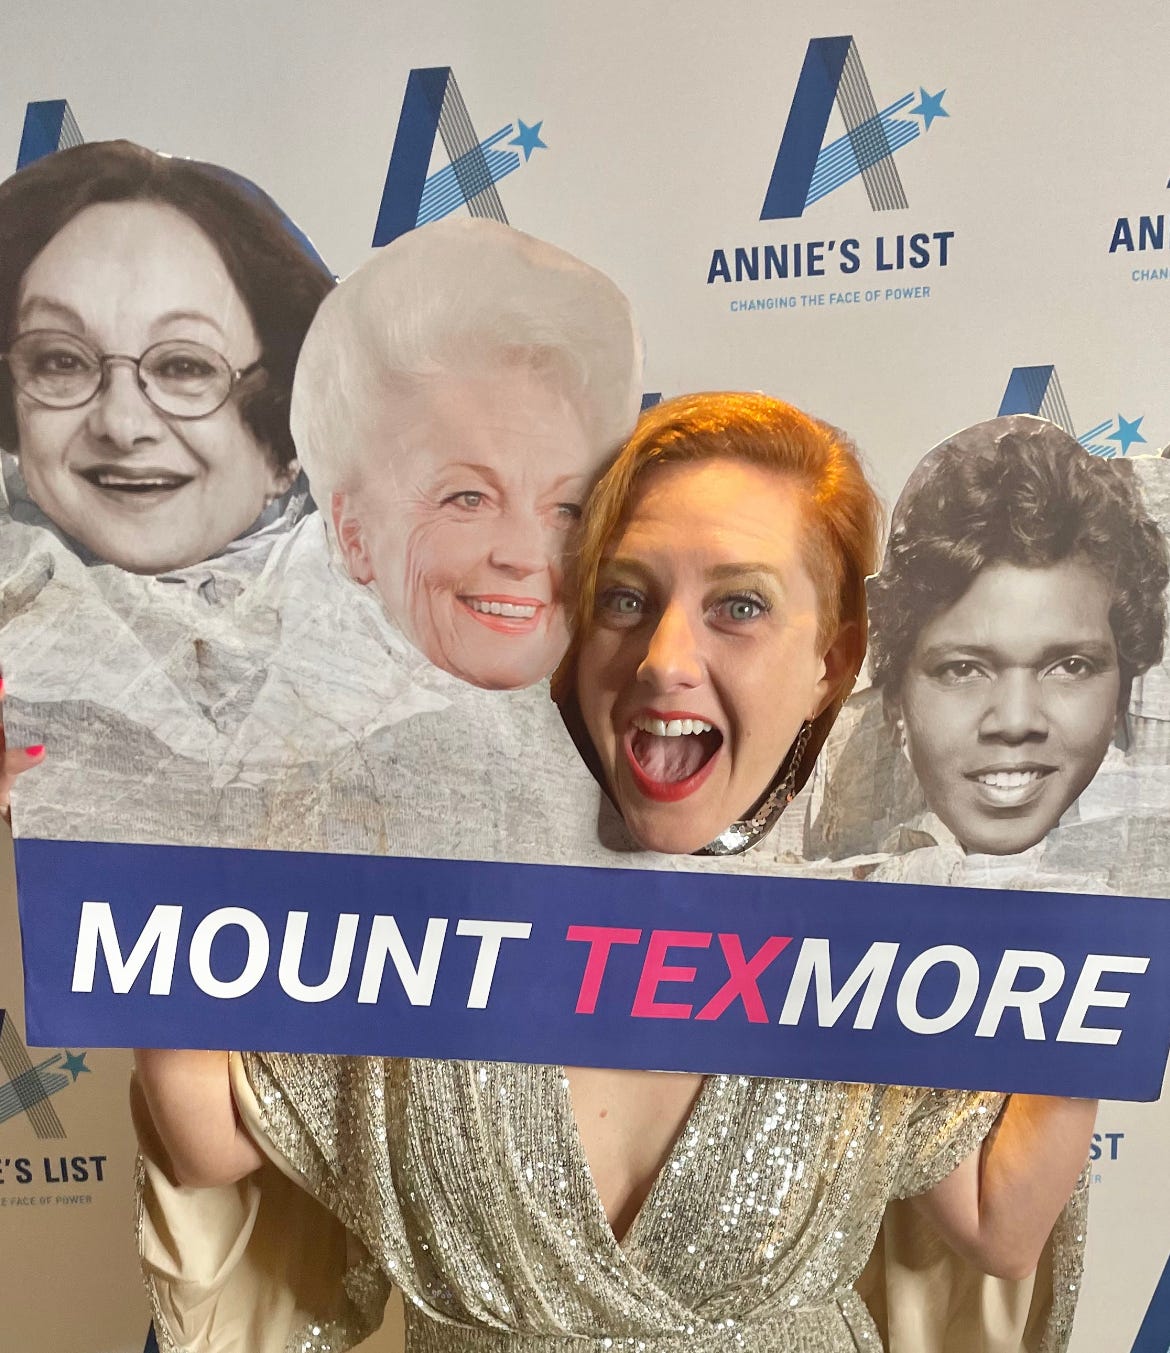 Against the backdrop of a repeating Annie's List logo, Becky places her ecstatic, smiling face into a "Mount Texmore" photo prop alongside the faces of Norma Rangel, Ann Richards, and Barbara Jordan